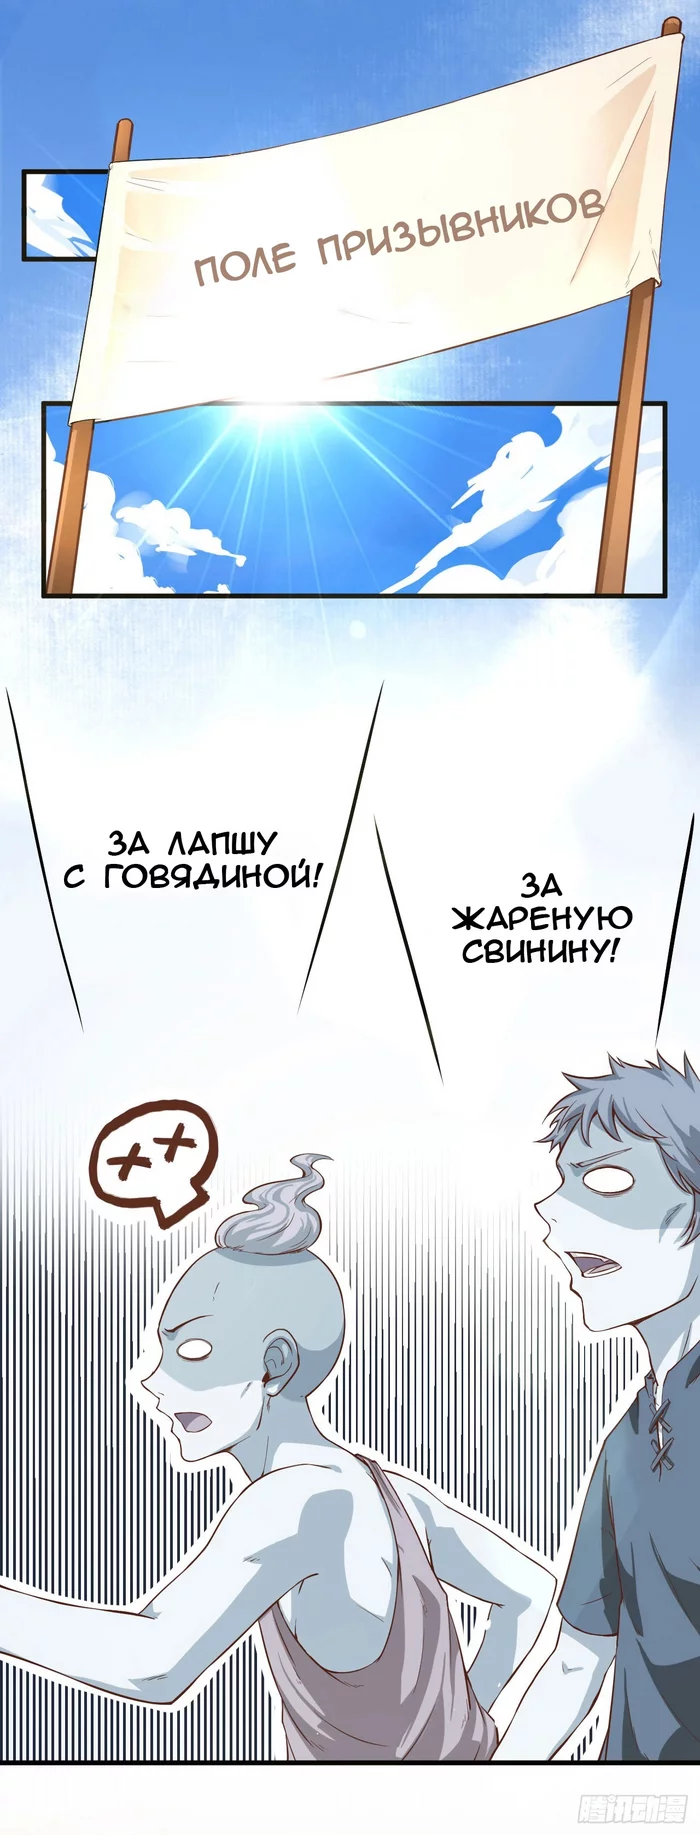 The Right Motivation - Humor, Comics, Manhua, Food, The appeal, Longpost